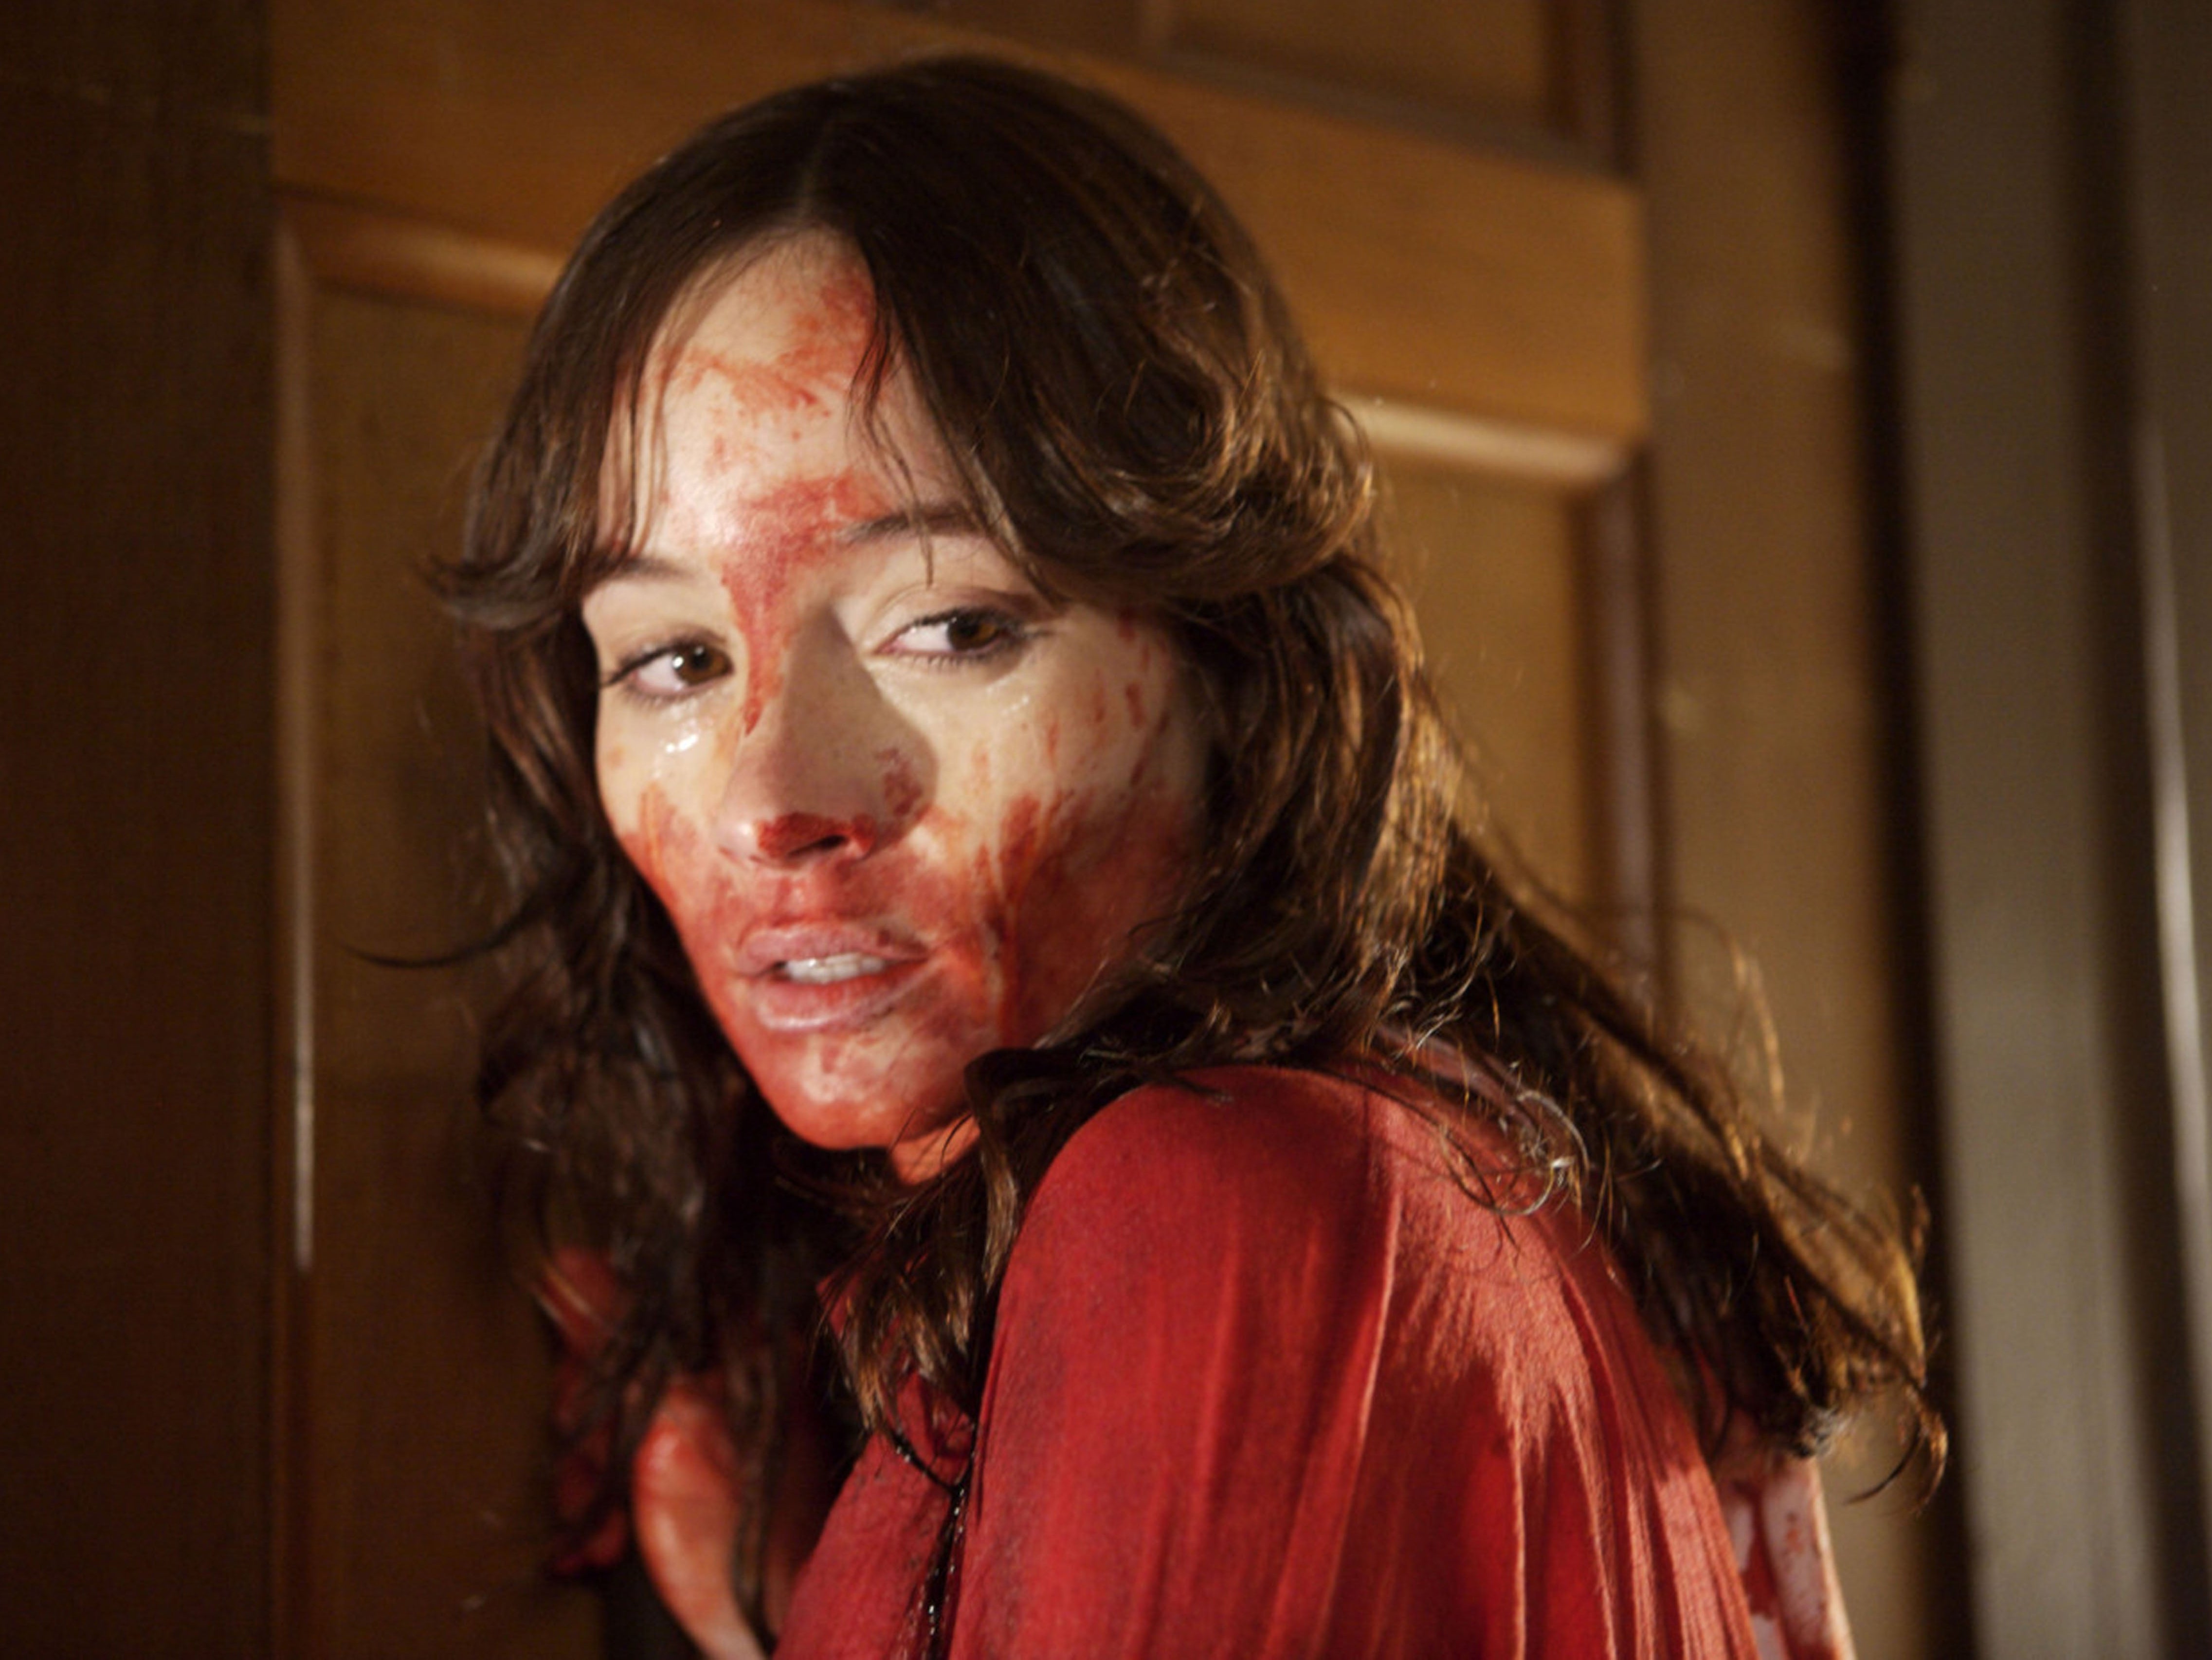 Jocelin Donahue as Samantha in ‘The House of the Devil’